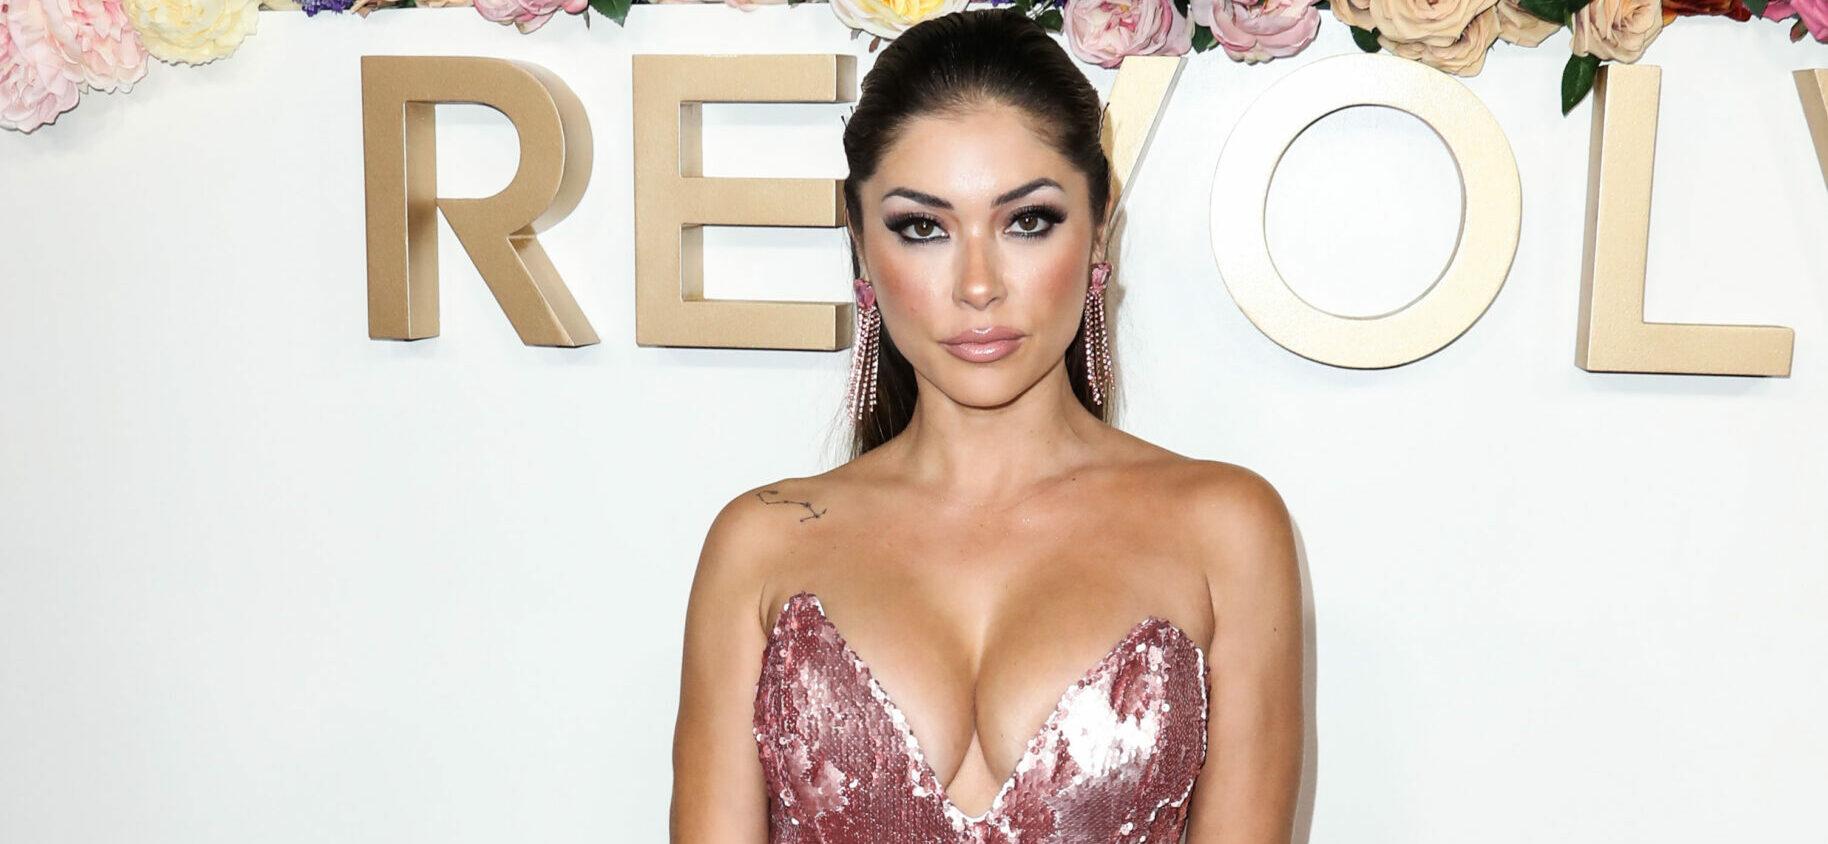 Arianny Celeste’s Chest Pops Out Of Bikini While In Mexico